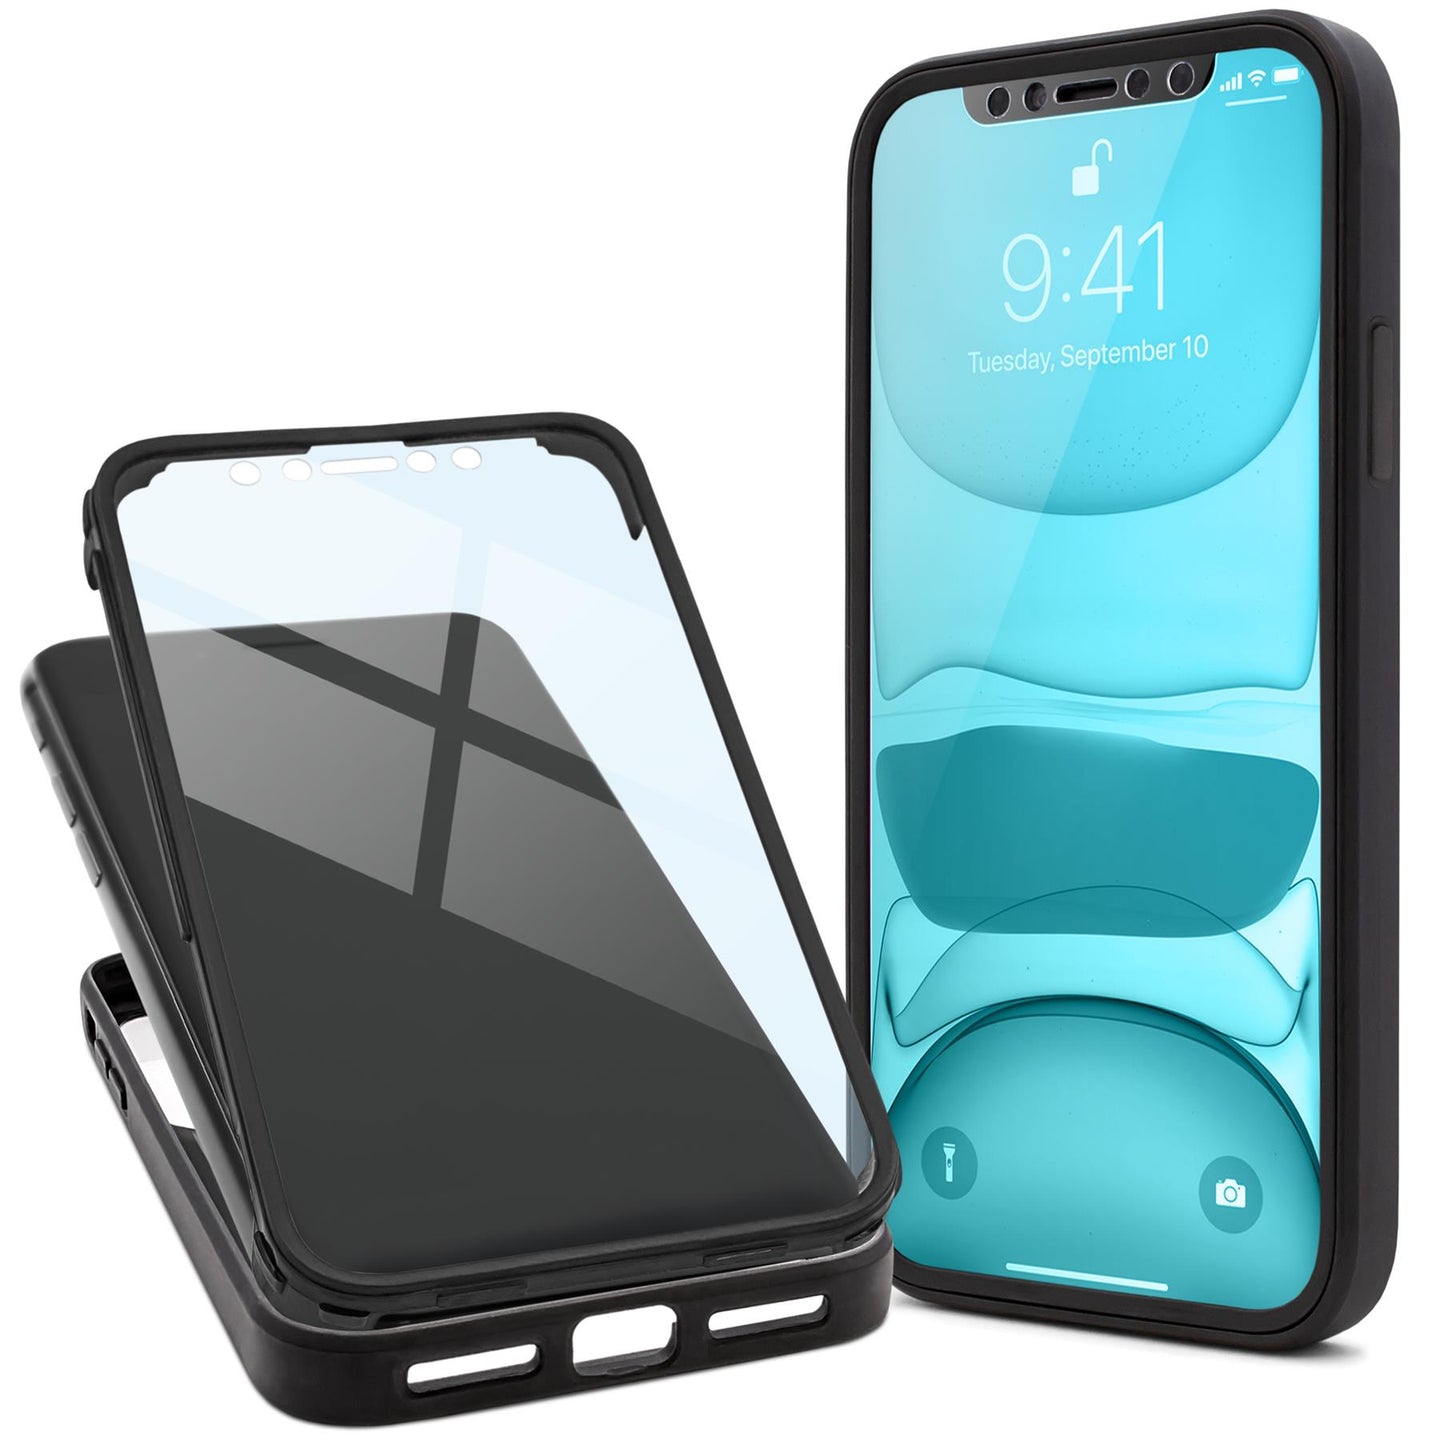 Moozy 360 Case for iPhone 11 - Black Rim Transparent Case, Full Body Double-sided Protection, Cover with Built-in Screen Protector